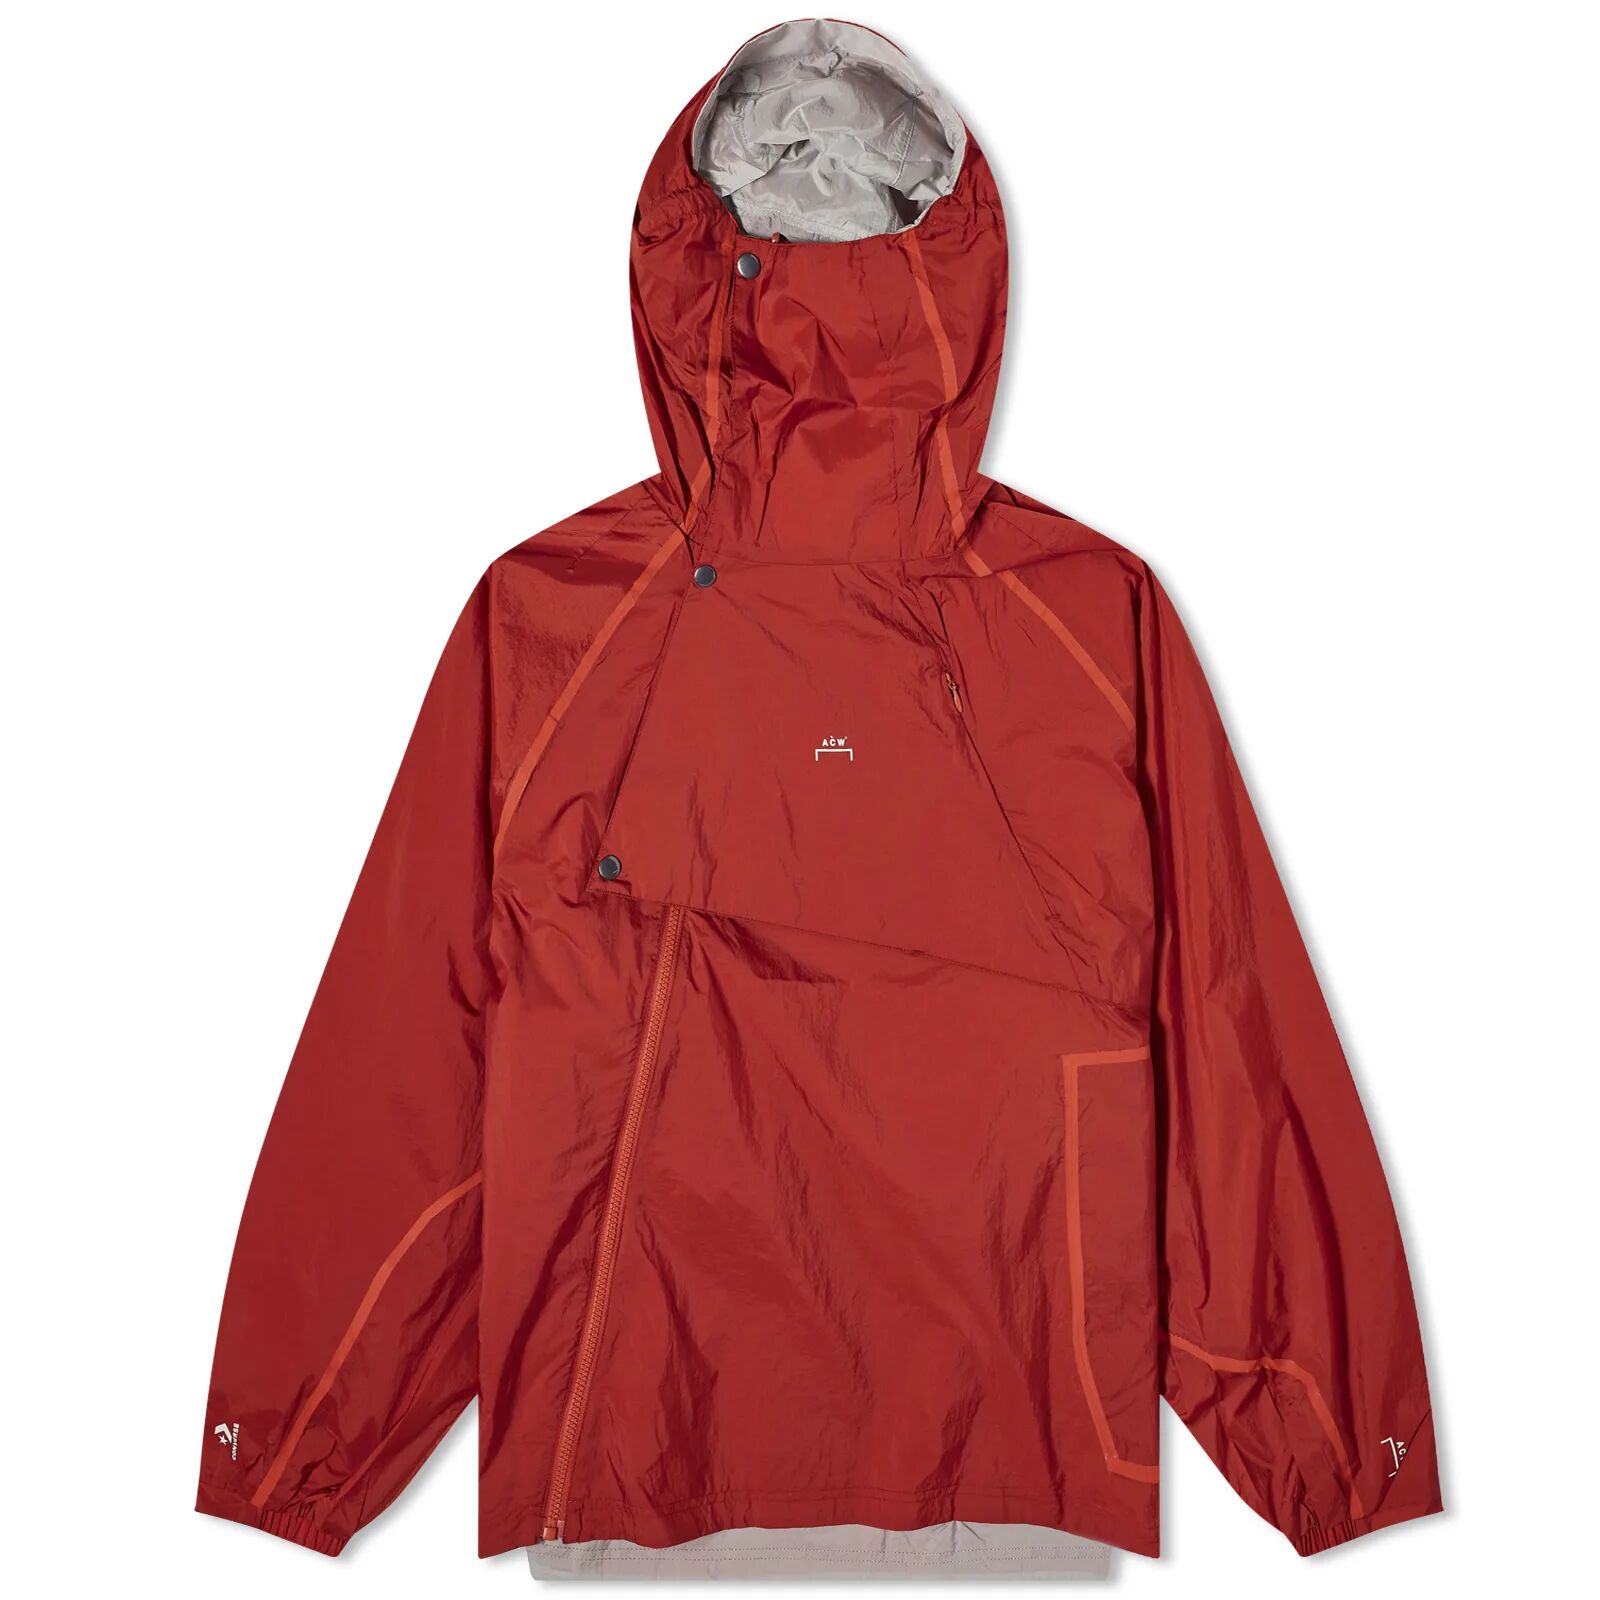 Converse x A-COLD-WALL* Wind Jacket in Rust Oxide, Size Small